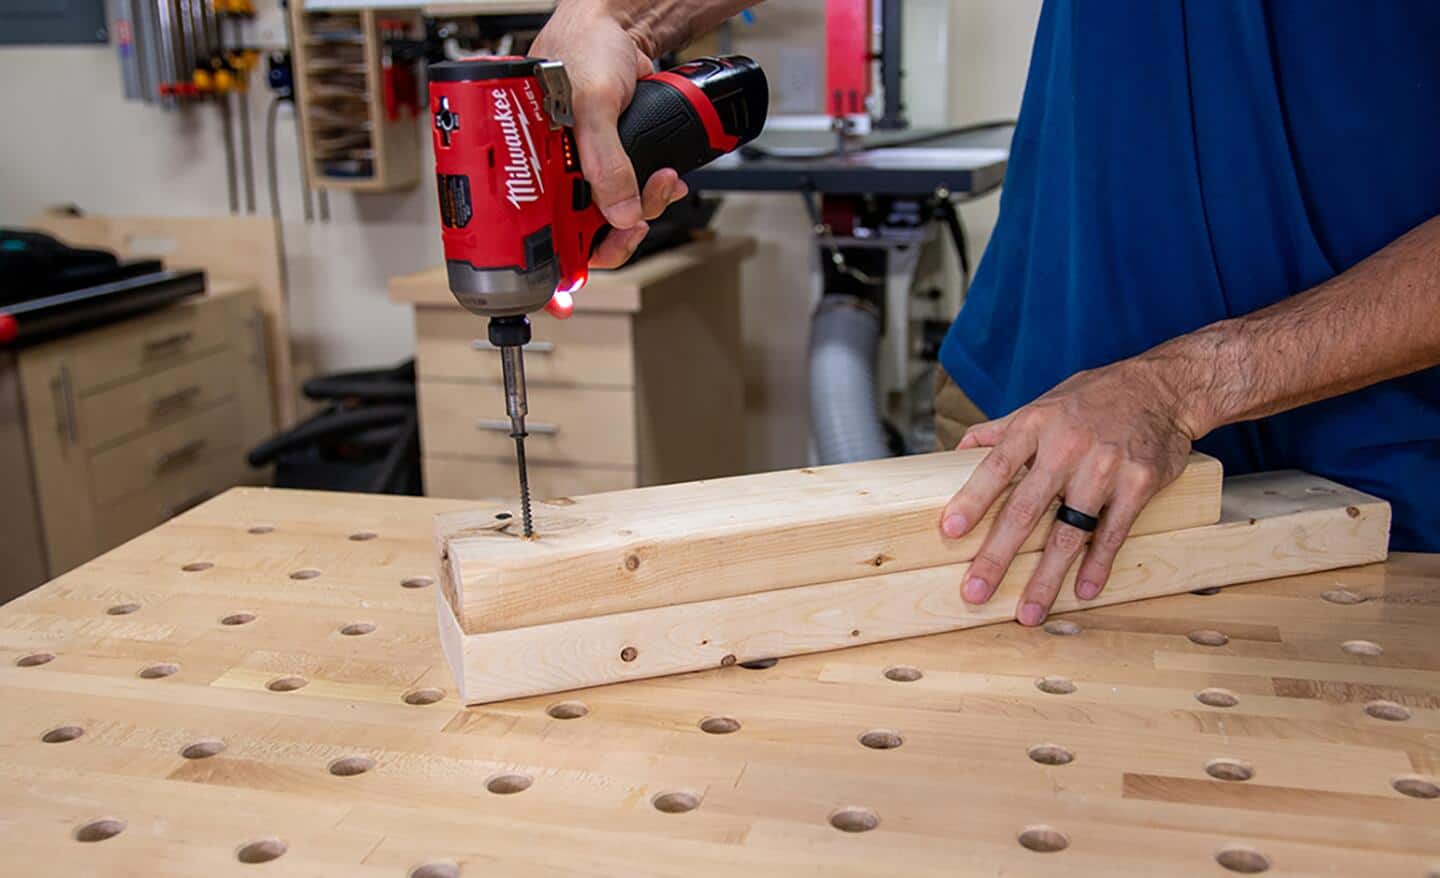 Someone using a hammer drill on two wood boards.